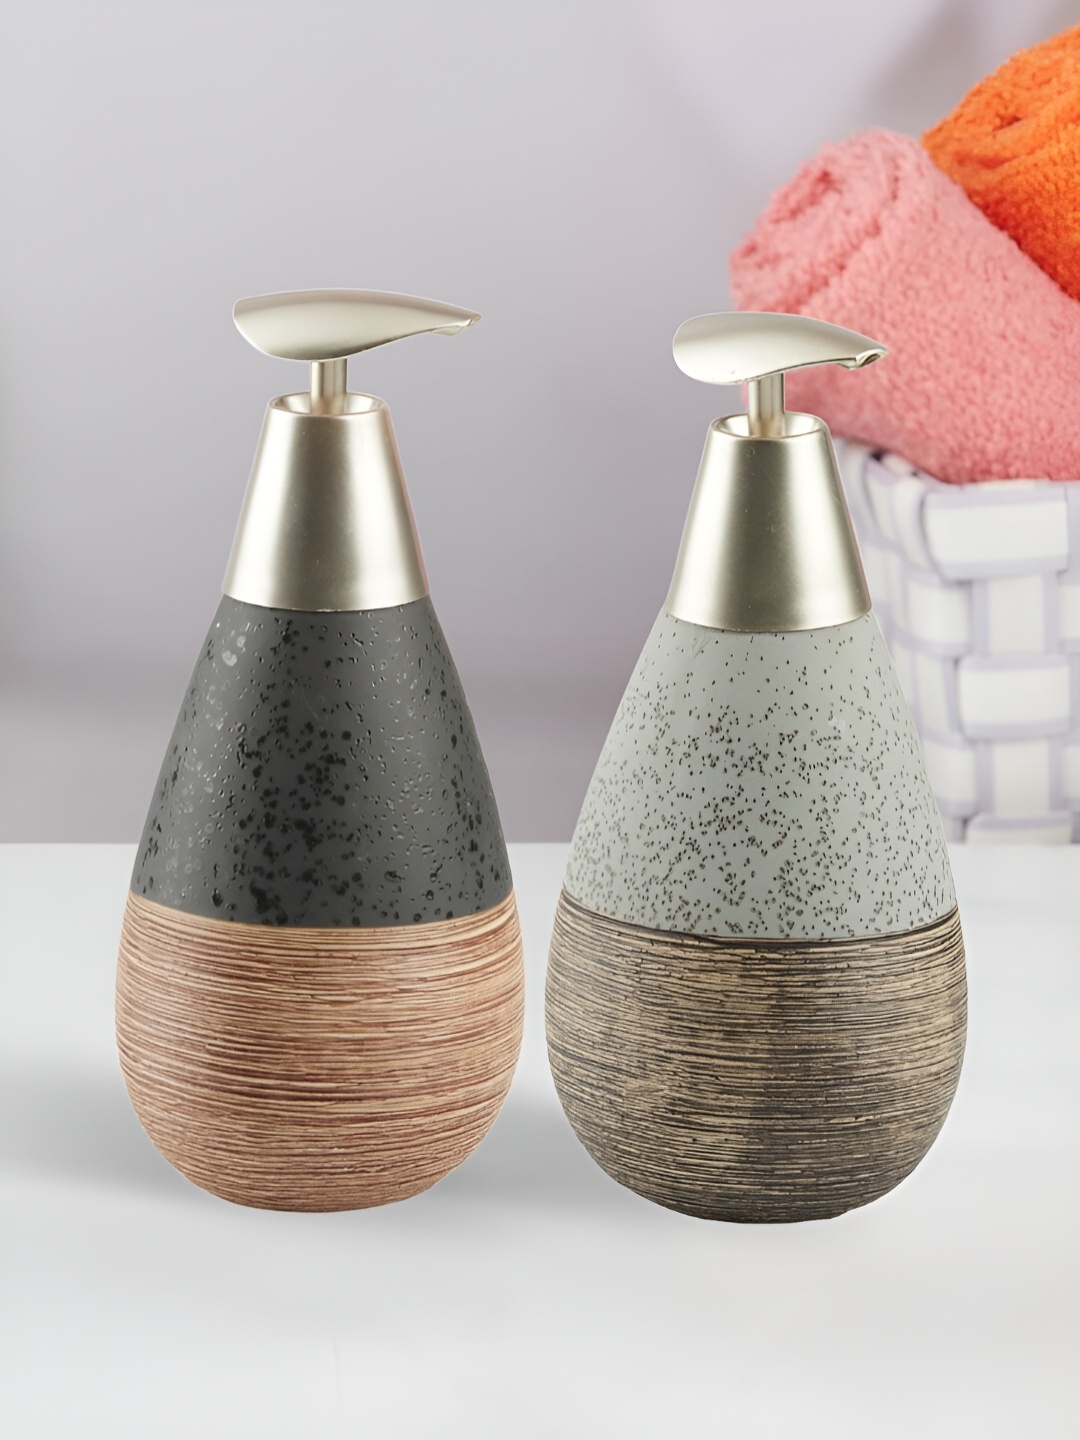 

Kookee Grey & Brown 2 Pieces Abstract Ceramic Soap Dispenser 300 ml